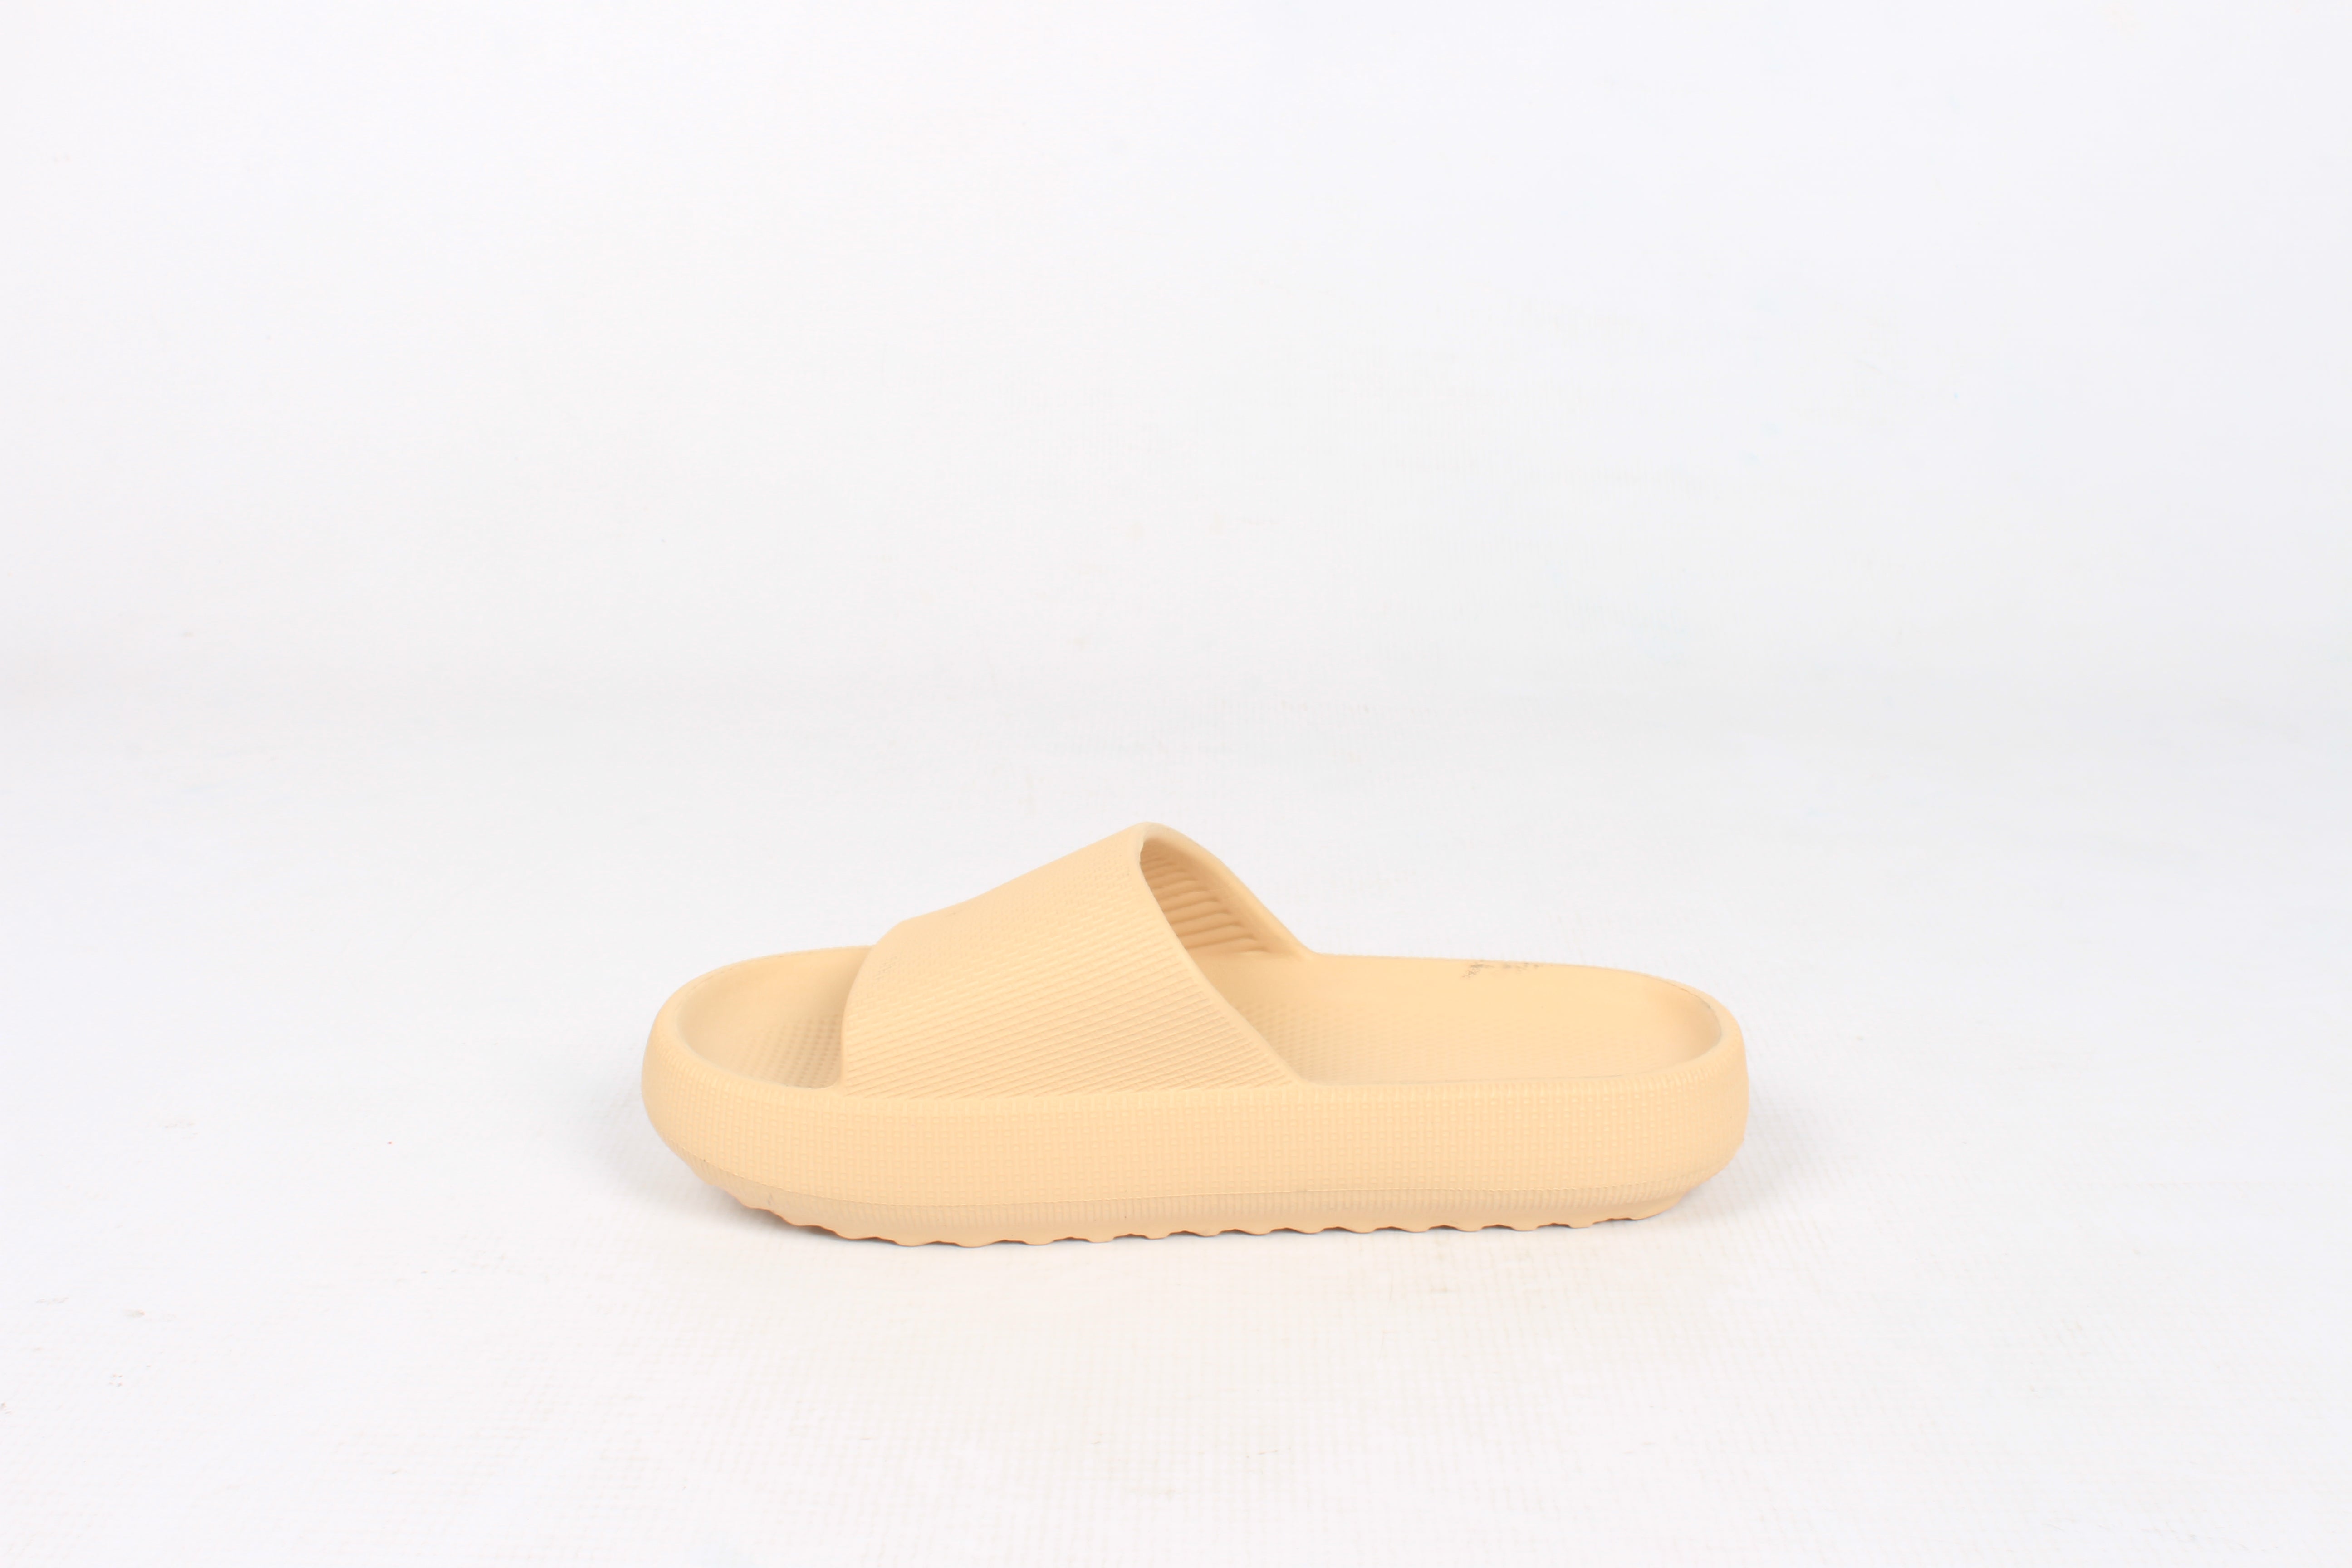 Sole slippers non slip waterfroof sandal